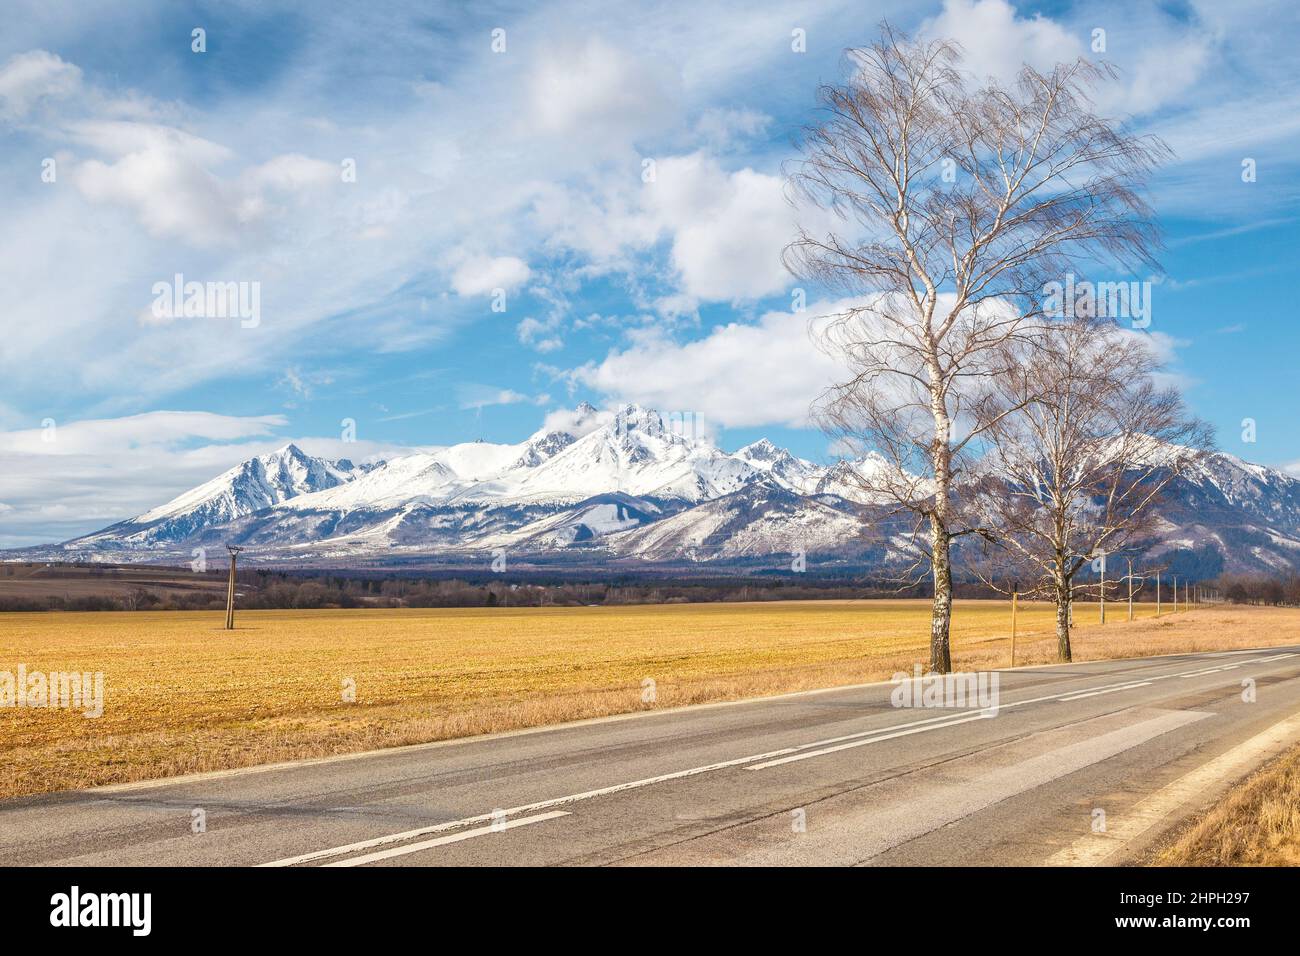 Road through the landscape with snowy mountains in the background. High Tatras National Park, Slovakia, Europe. Stock Photo